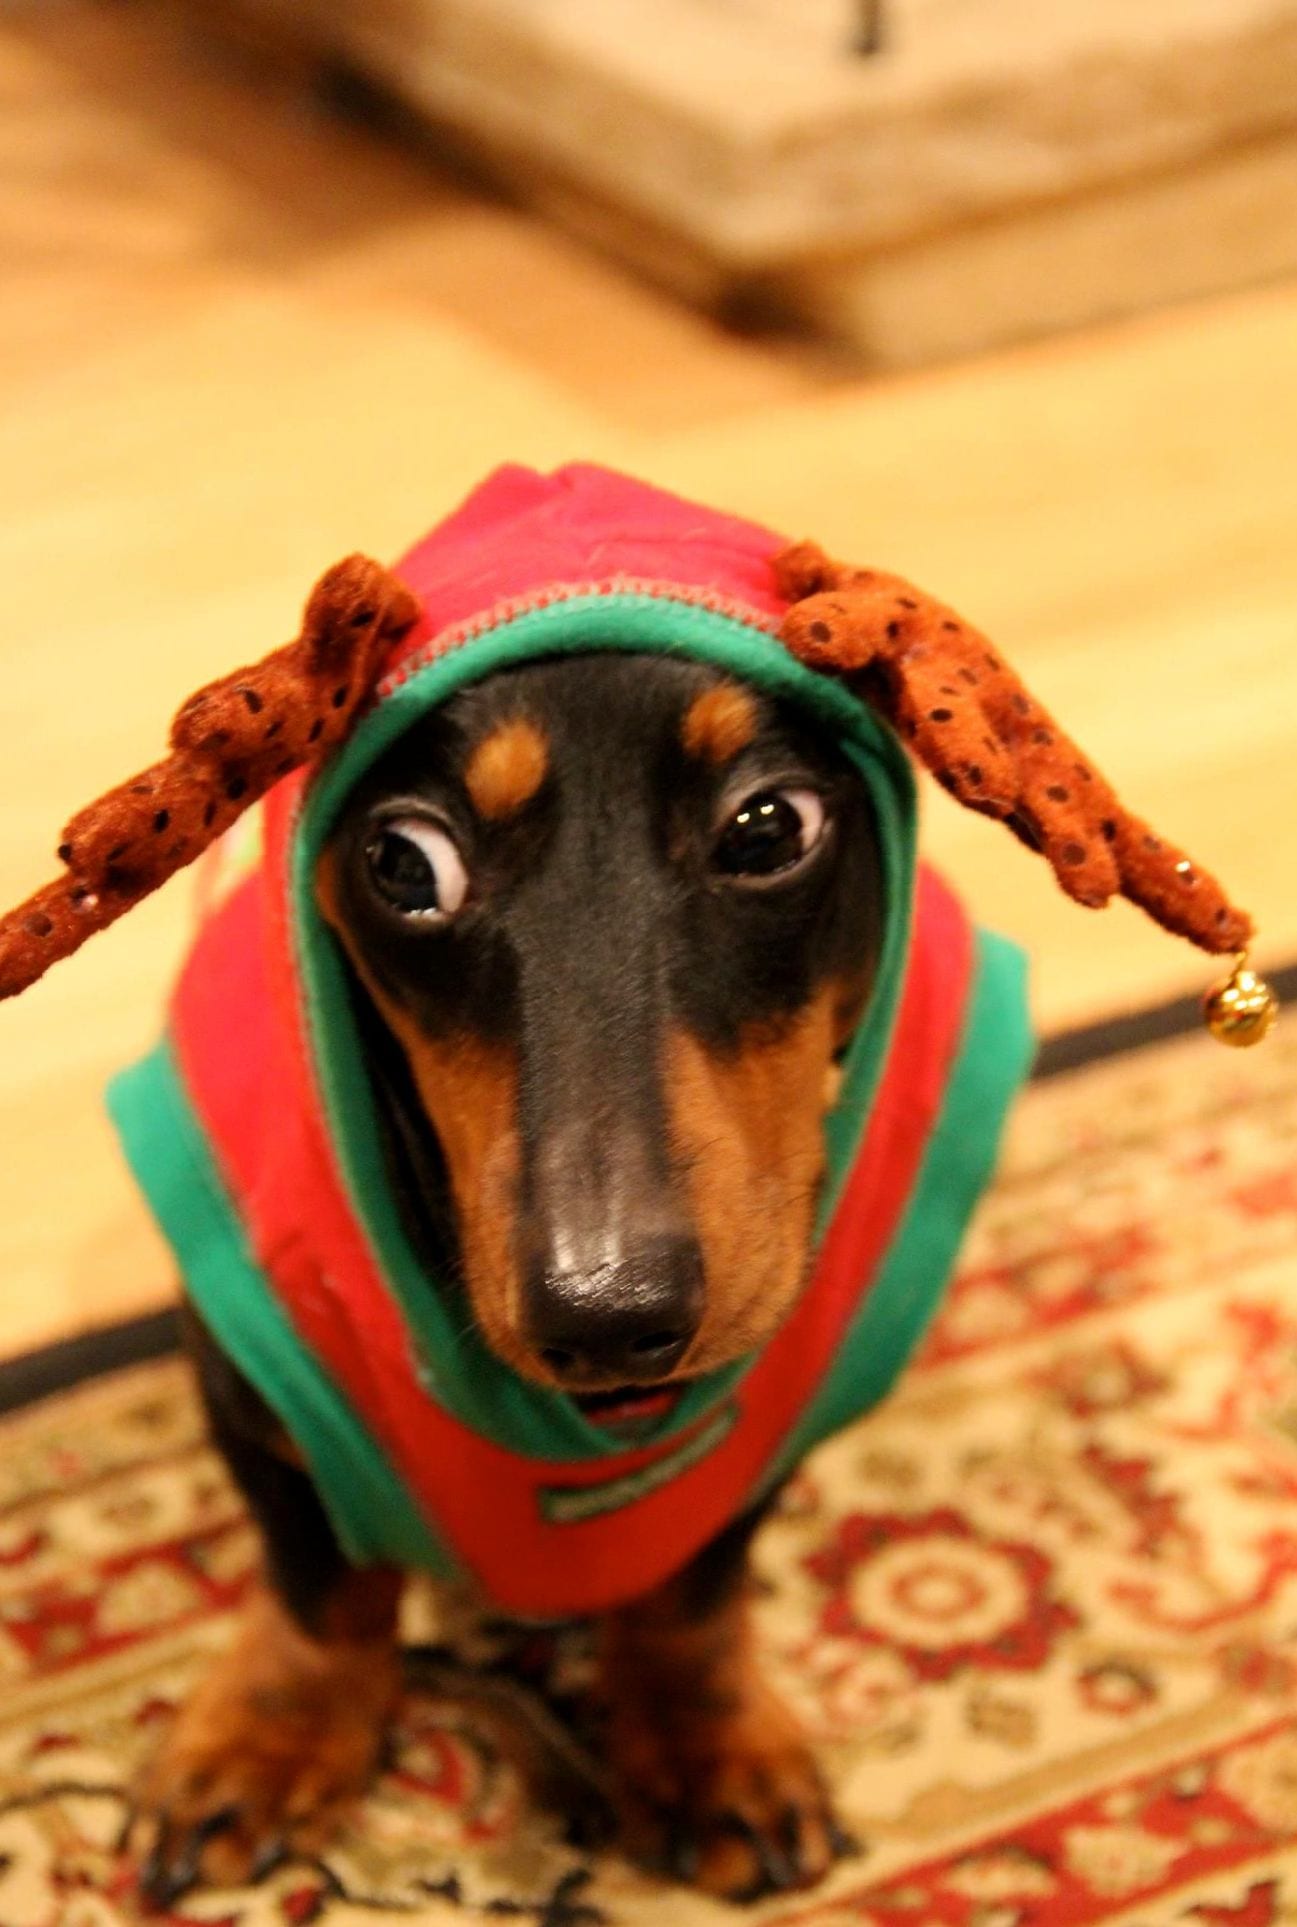 A Dachshund wearing a reindeer costume while sitting on the carpet